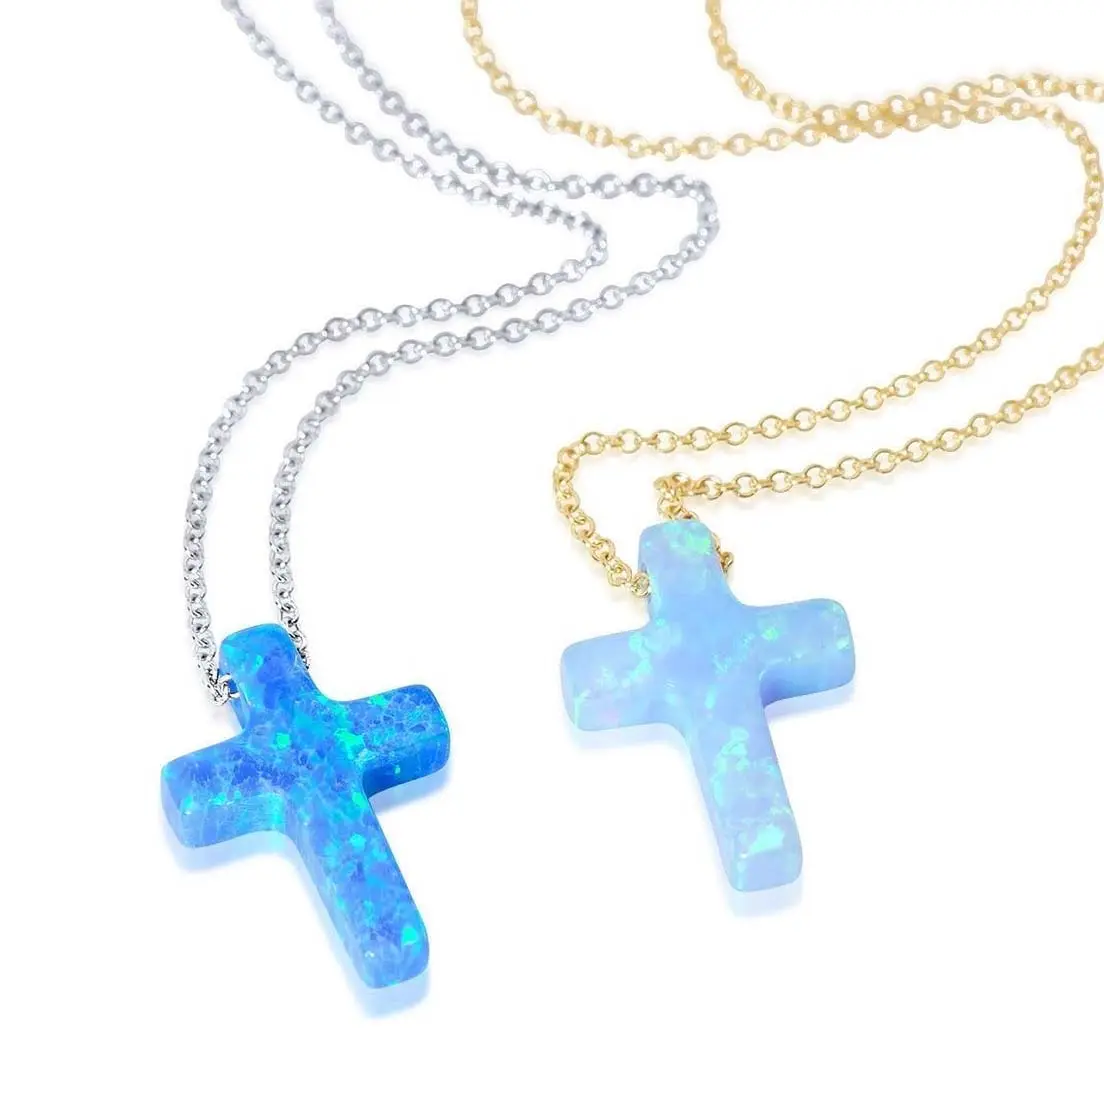 Religious Cross Opal 9x12mm Handgrafted Pendant Lab- Created Opal 14k Gold Filled Vermeil Opal Cross Chokers Necklace